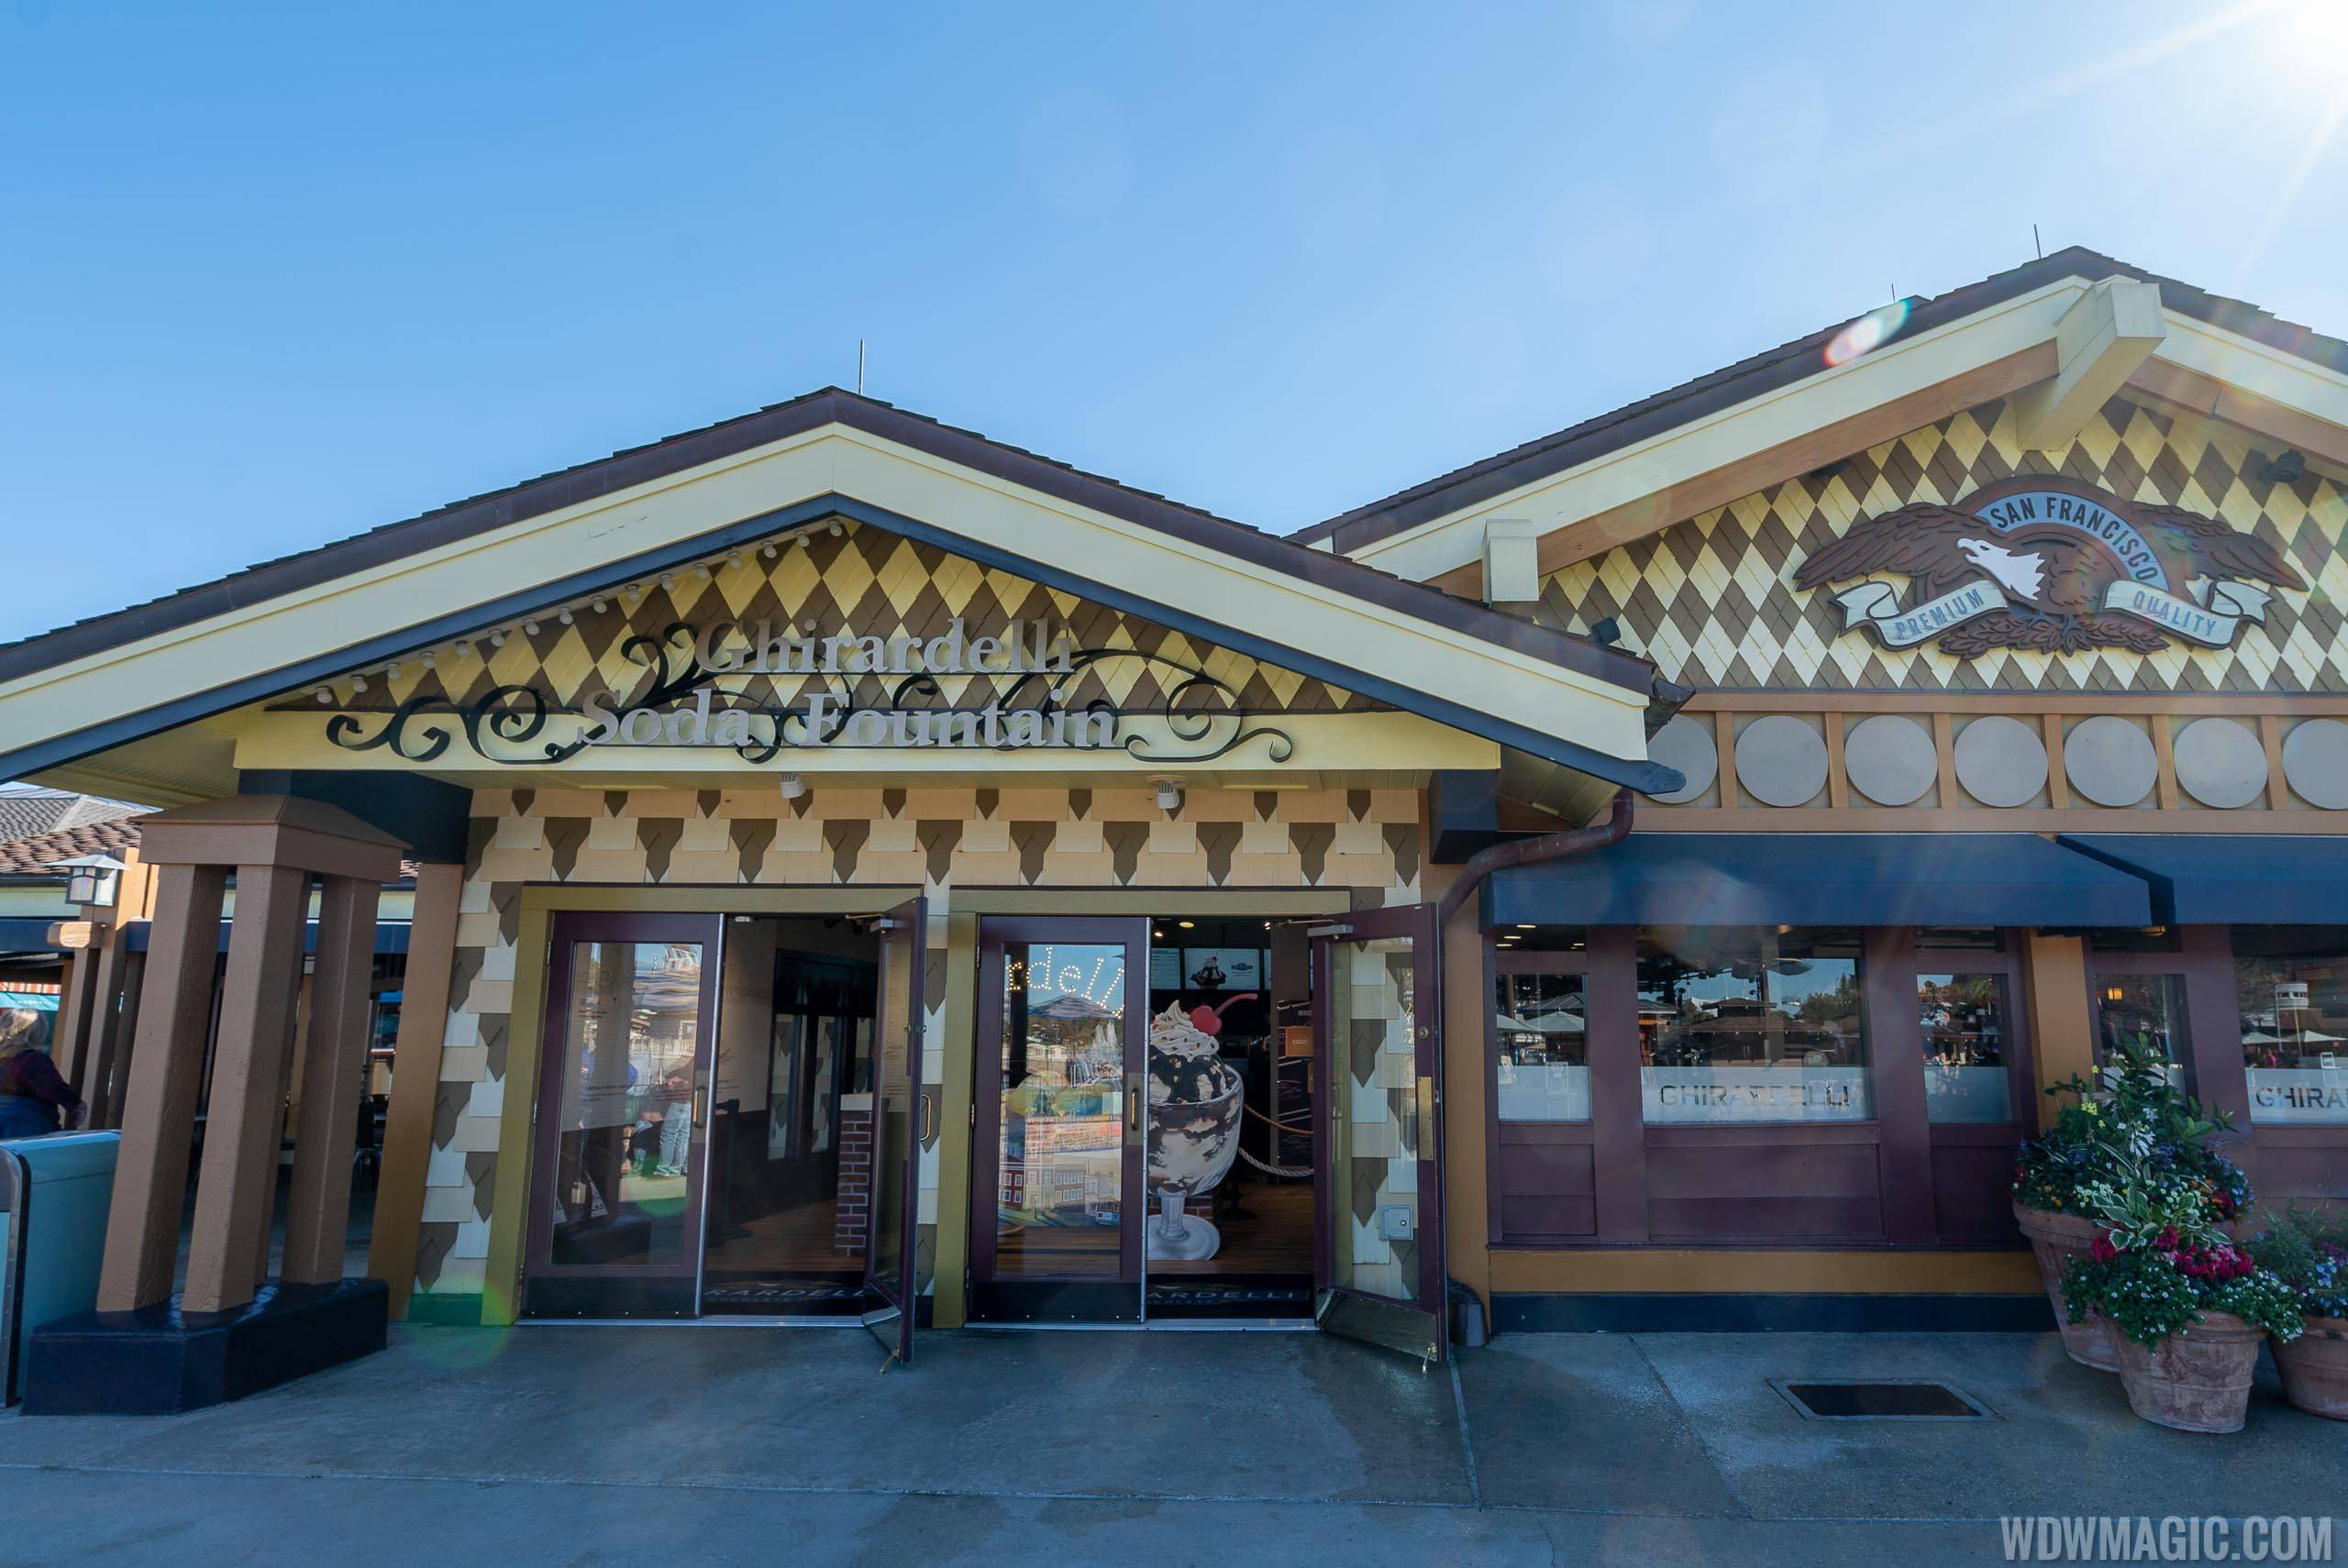 PHOTOS - A look at the refurbished Ghirardelli Soda Fountain in Disney Springs